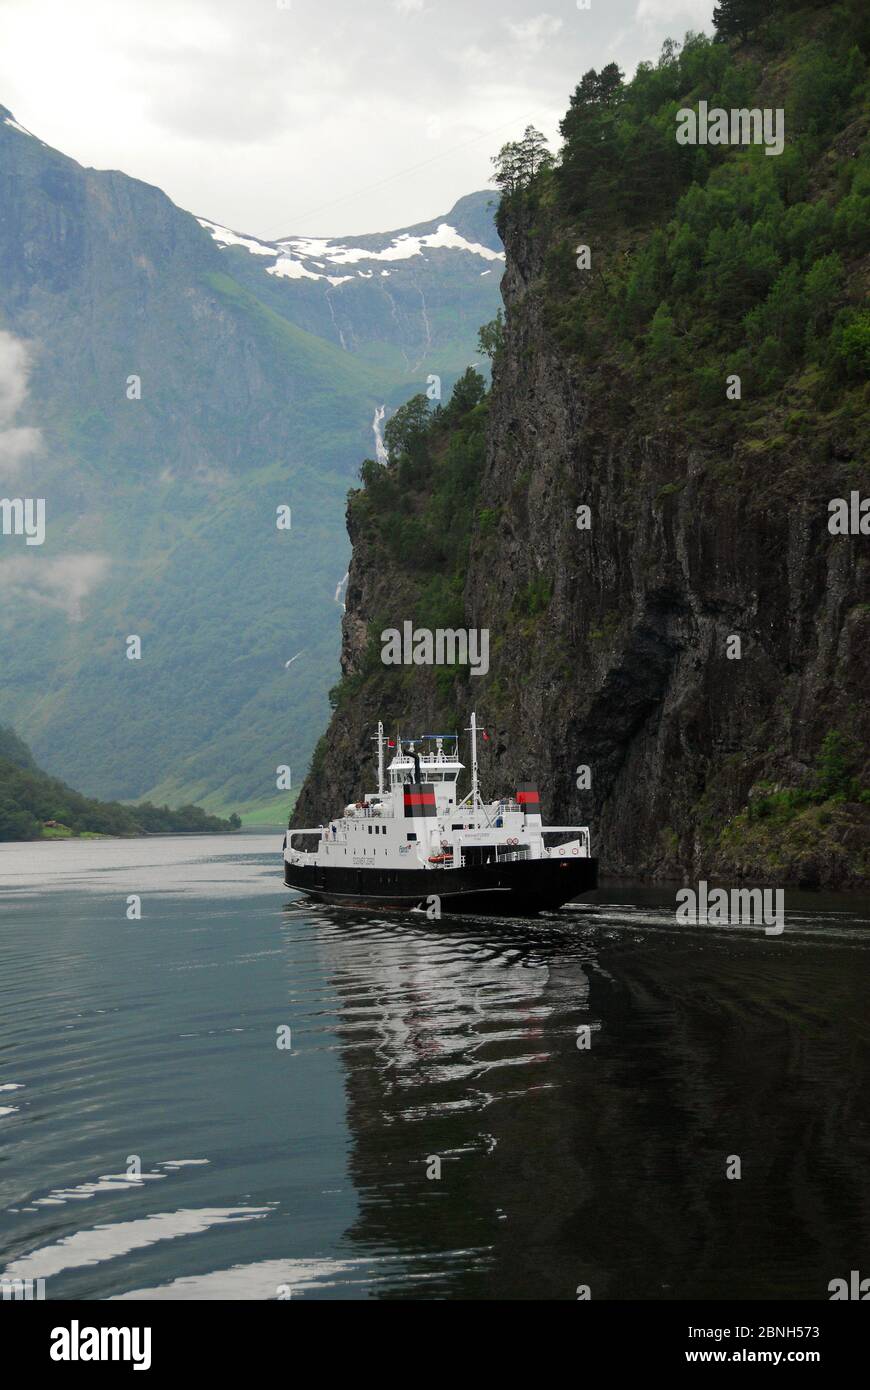 Norway, Sognefjord (or Sognefjorden) fjord_02 Stock Photo